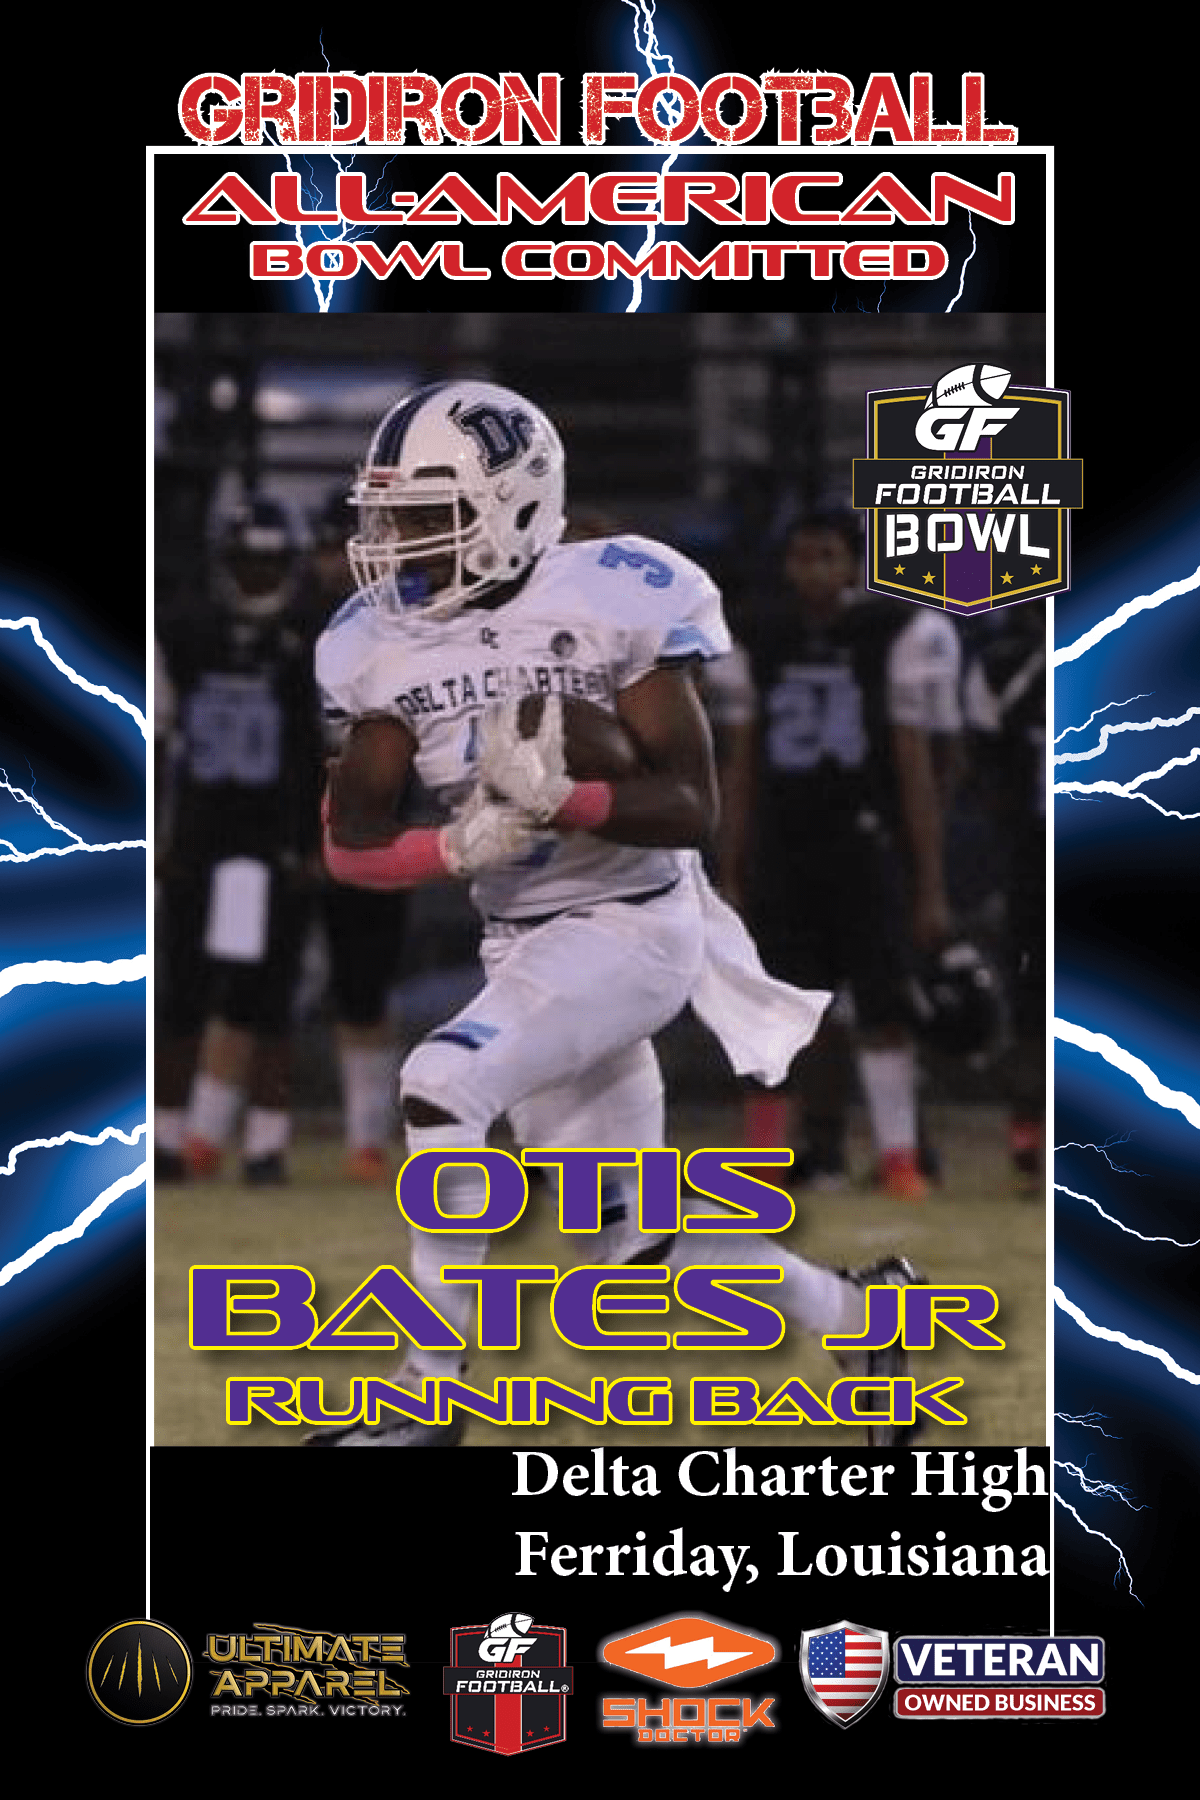 BREAKING NEWS: Delta Charter High School (Ferriday, LA) RB Otis Bates Jr. Commits To The Gridiron Football All-American Bowl Game